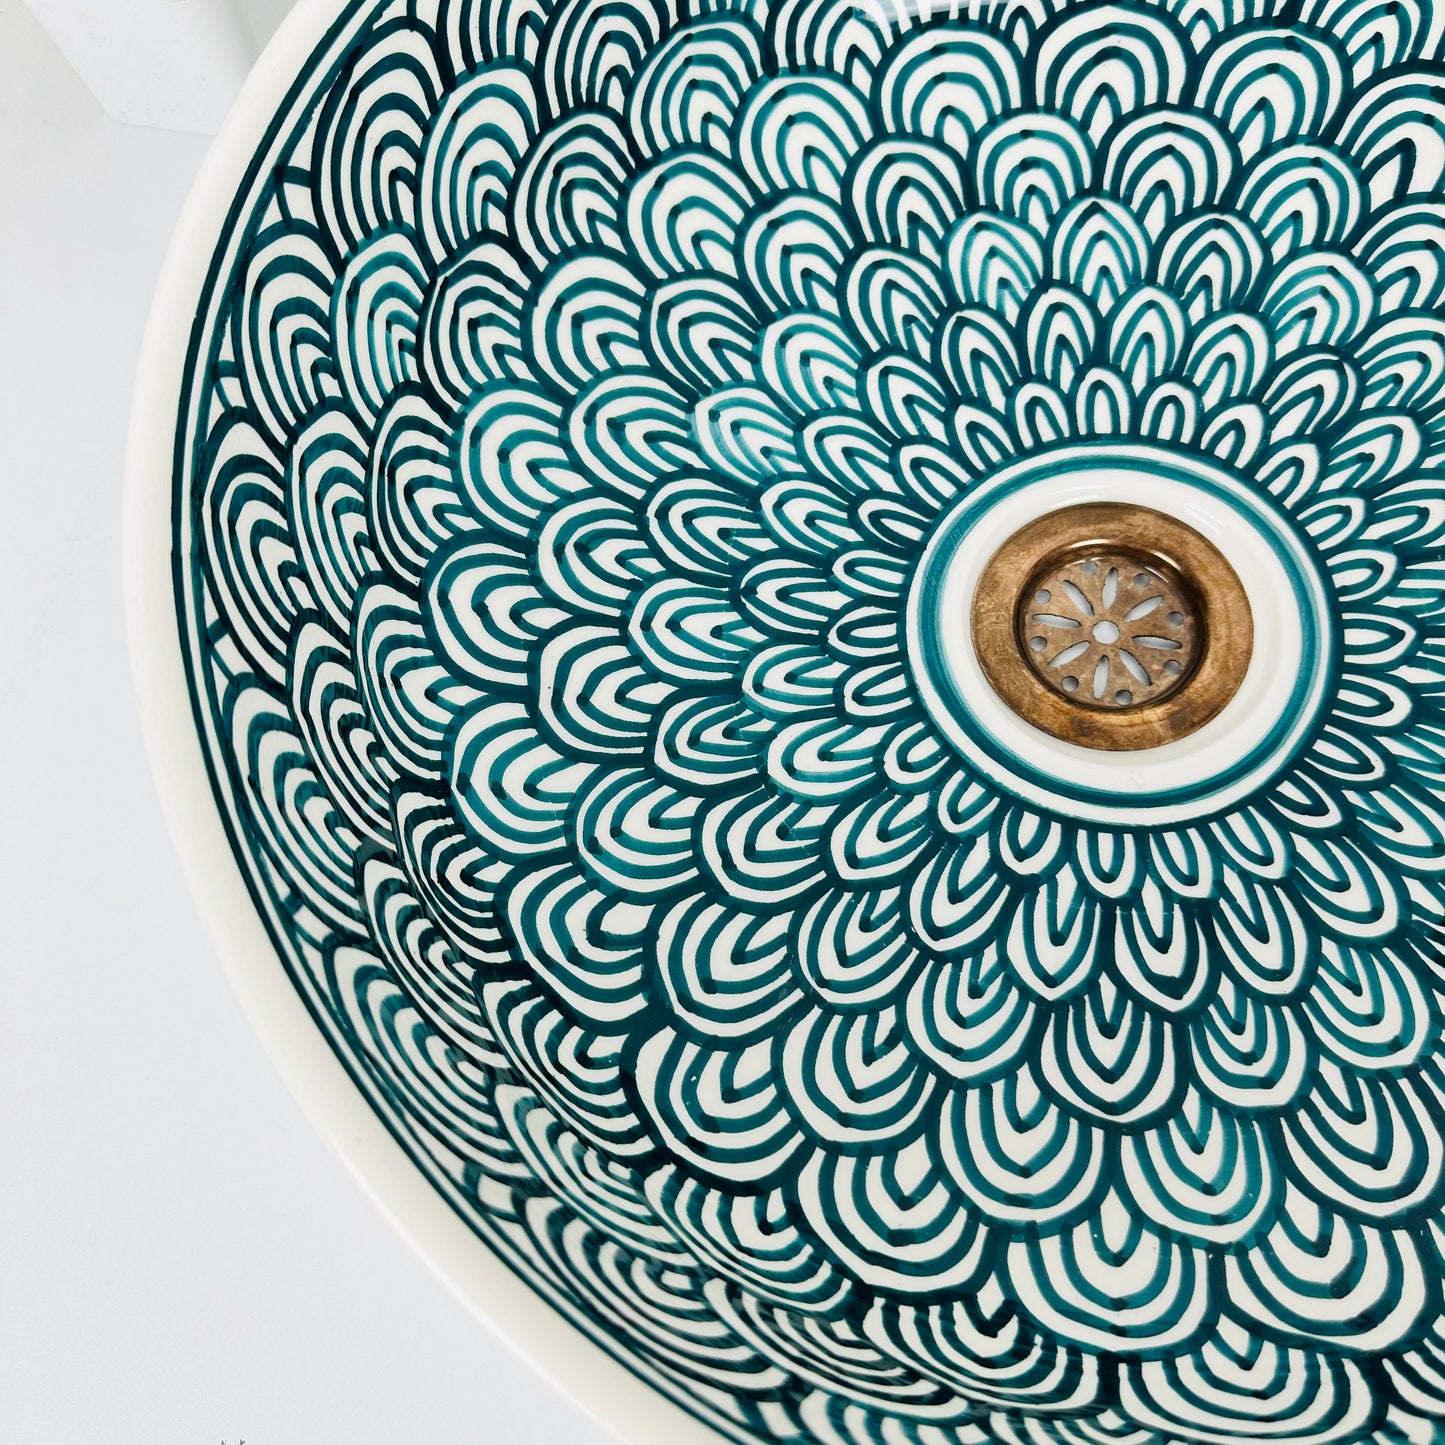 Oceanic Tranquility: Handcrafted Ceramic Sink 100% handmade